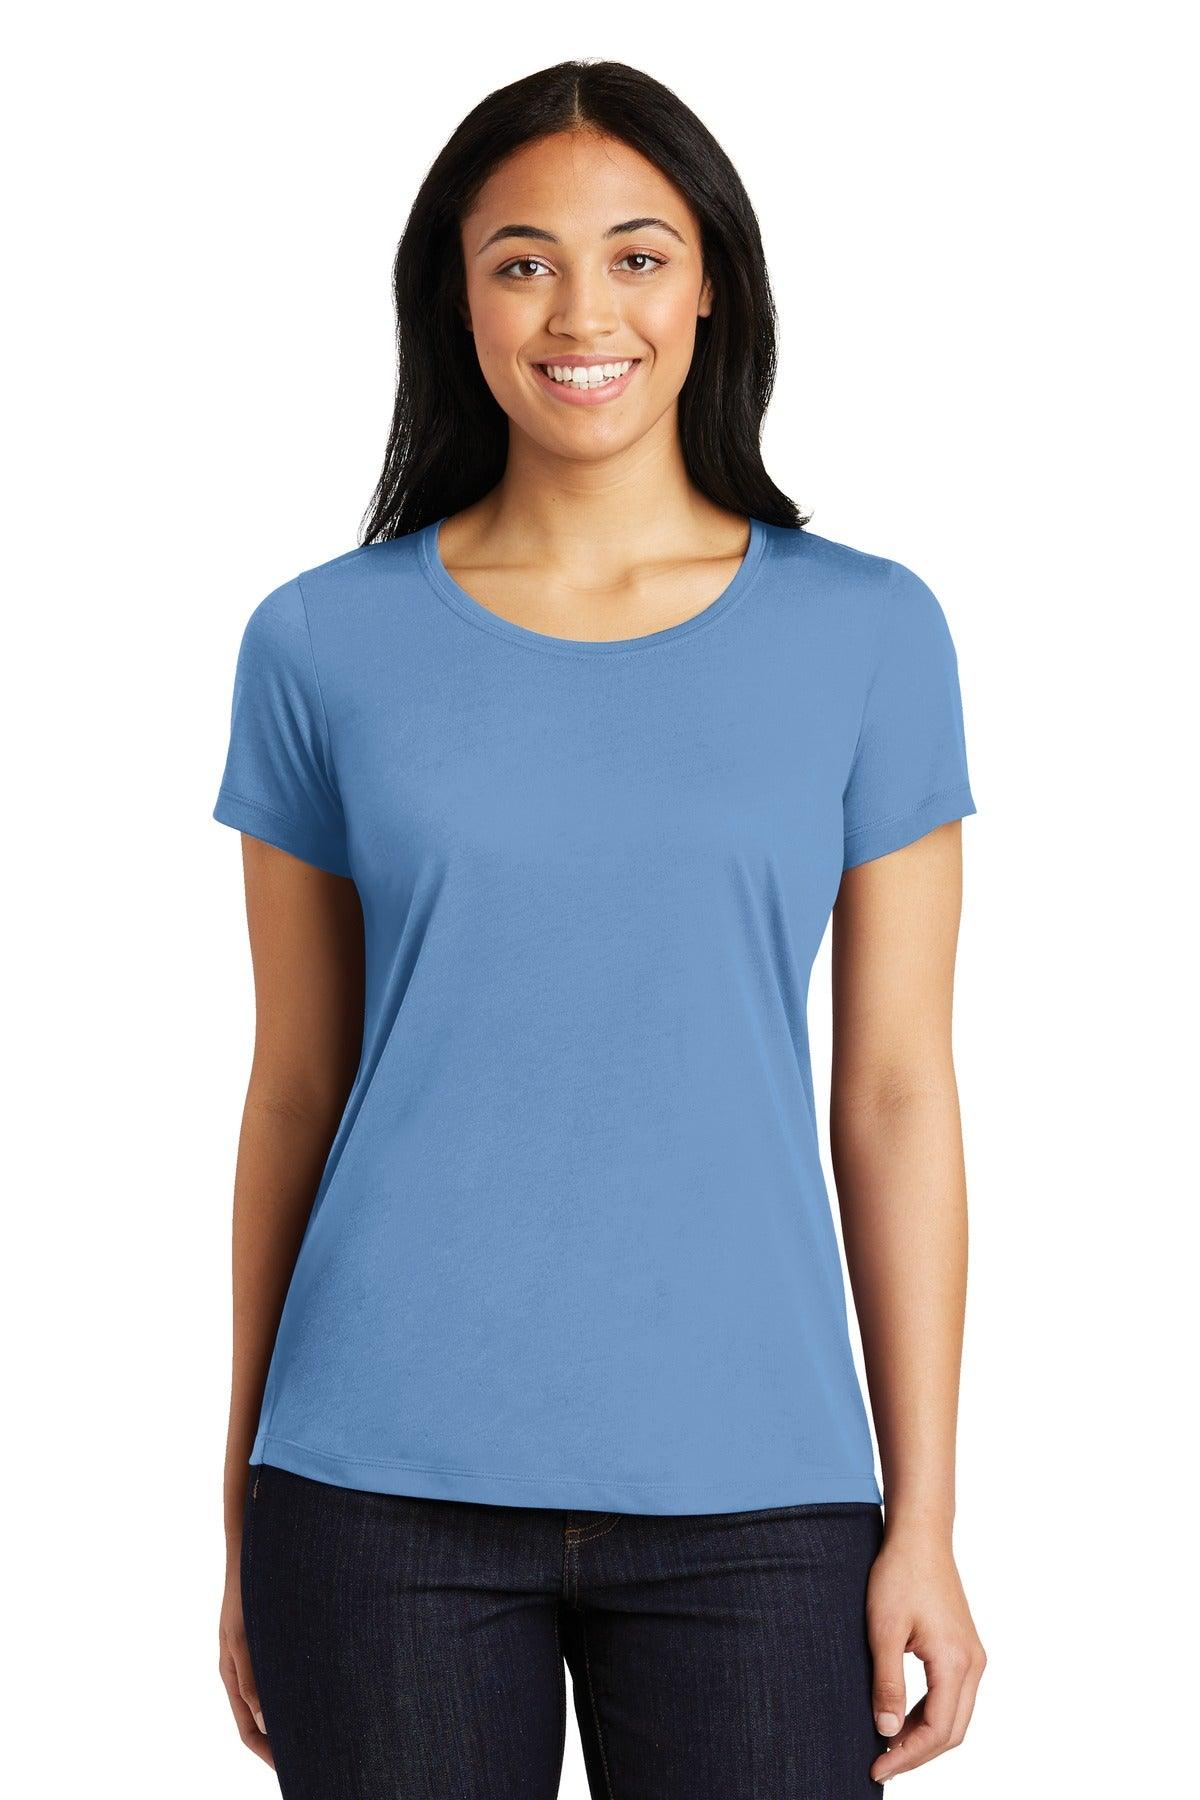 Sport-Tek Ladies PosiCharge Competitor Cotton Touch Scoop Neck Tee. LST450 - Dresses Max